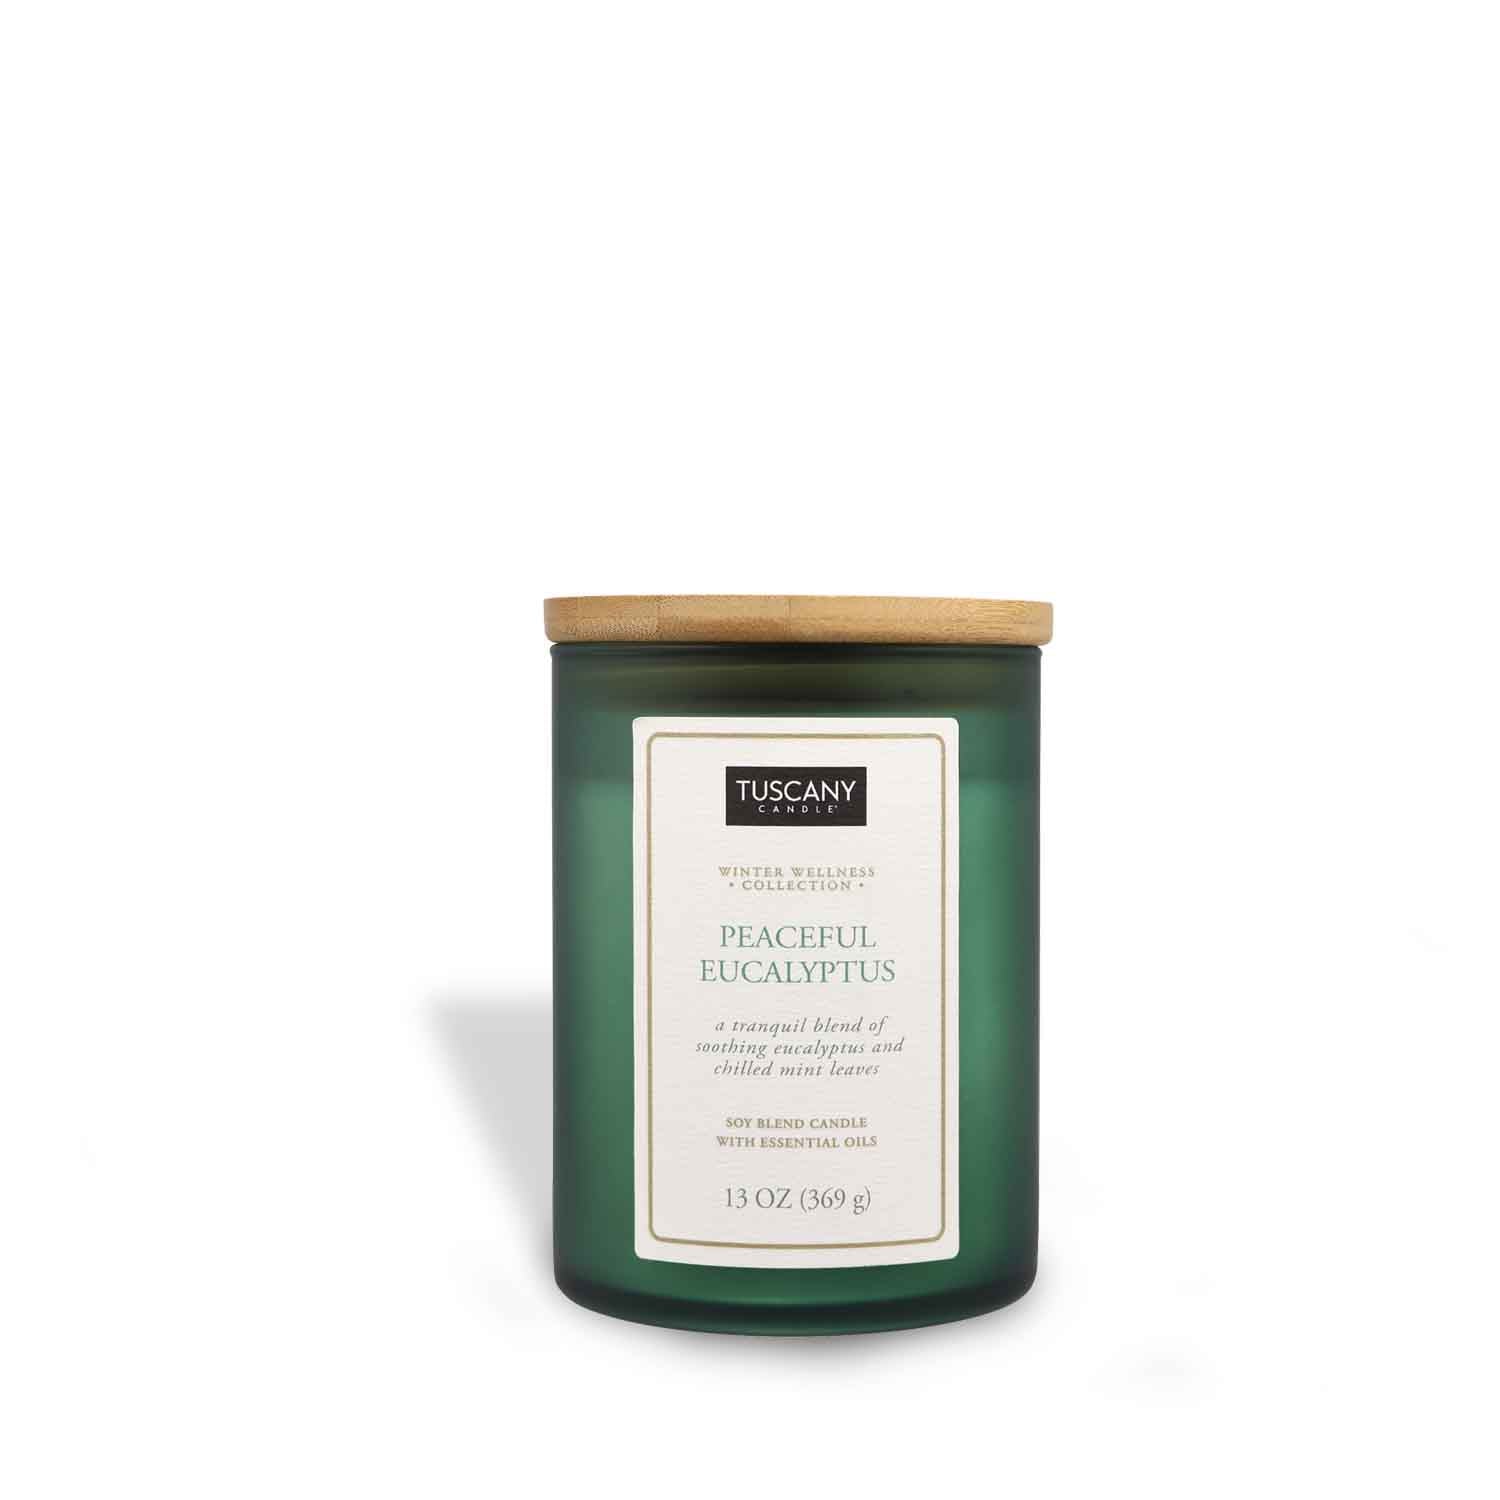 Peaceful Eucalyptus candle from the Winter Wellness Aromatherapy collection, elegantly encased in a matte-finish colored jar with its pure white wax highlighted by a modest paper label.